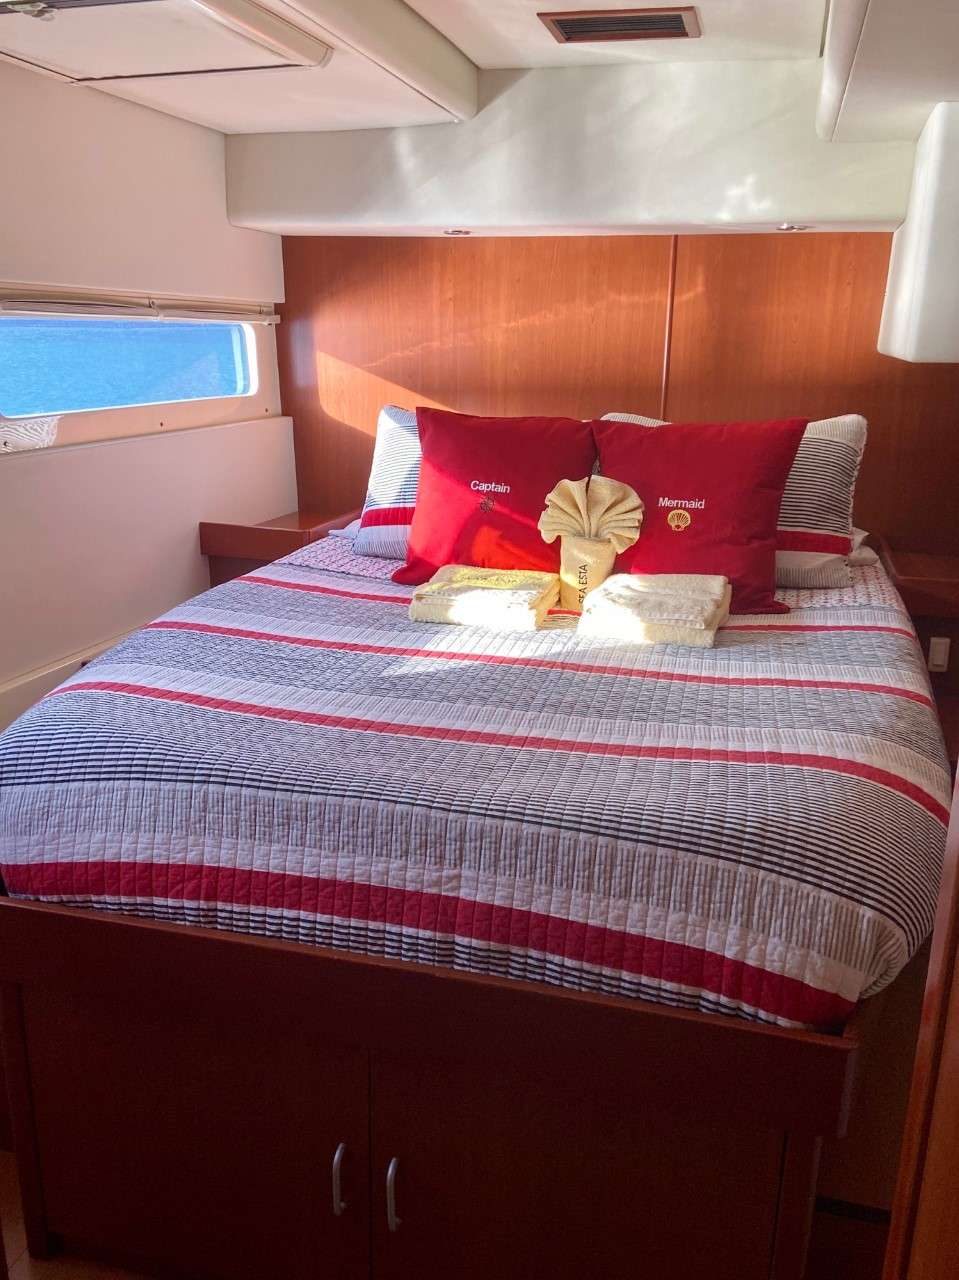 SEA ESTA Yacht Charter - Have the best sleep ever as all staterooms provide cooling memory foam mattress toppers.